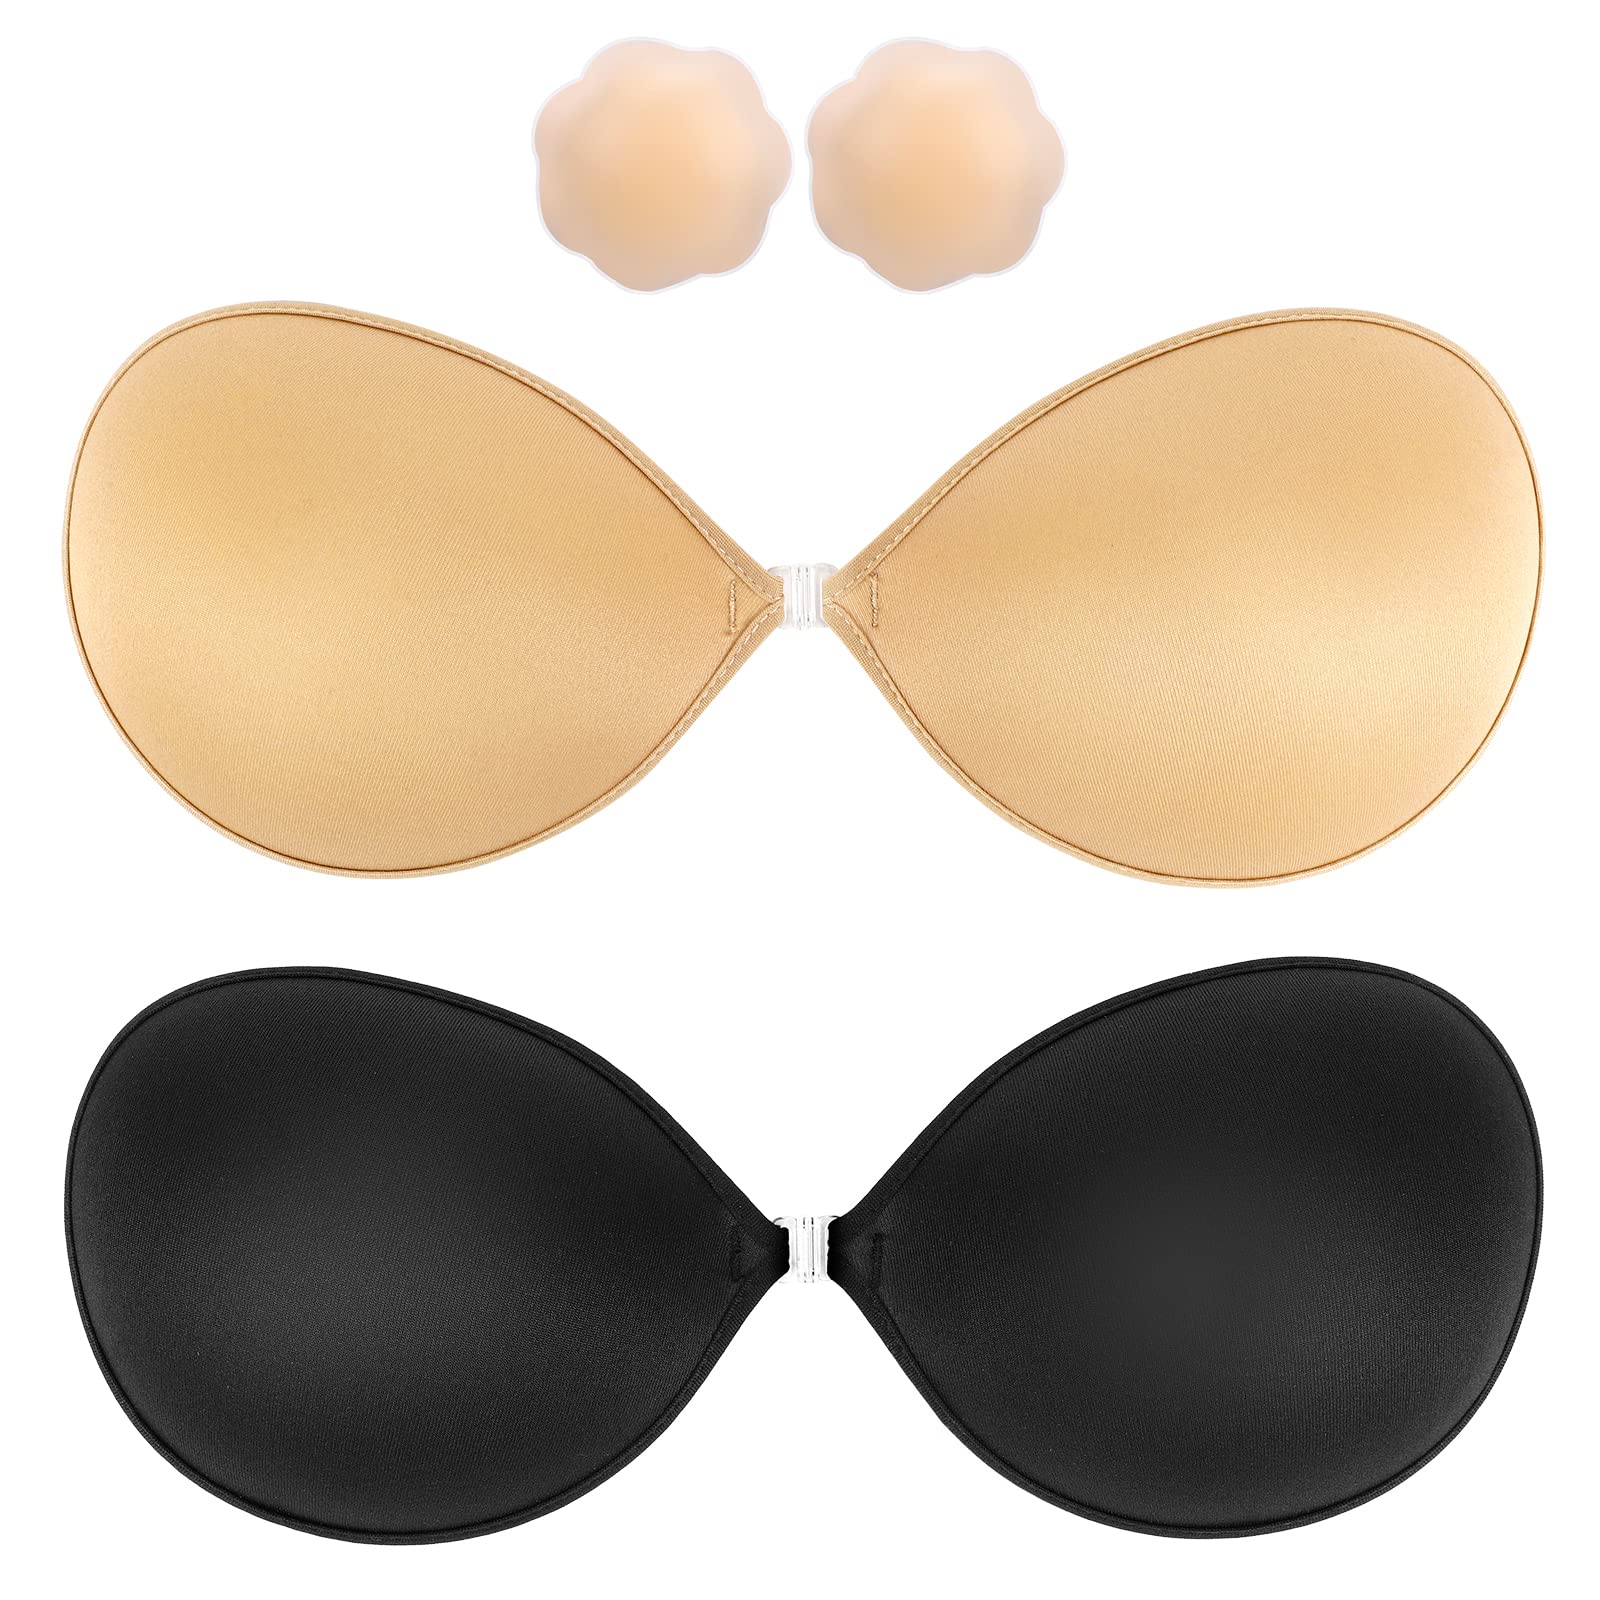 Ticoni Adhesive Bra Invisible Sticky Strapless Push up Reusable Silicone  Covering Bras for Backless Dress with Nipple Covers Bei